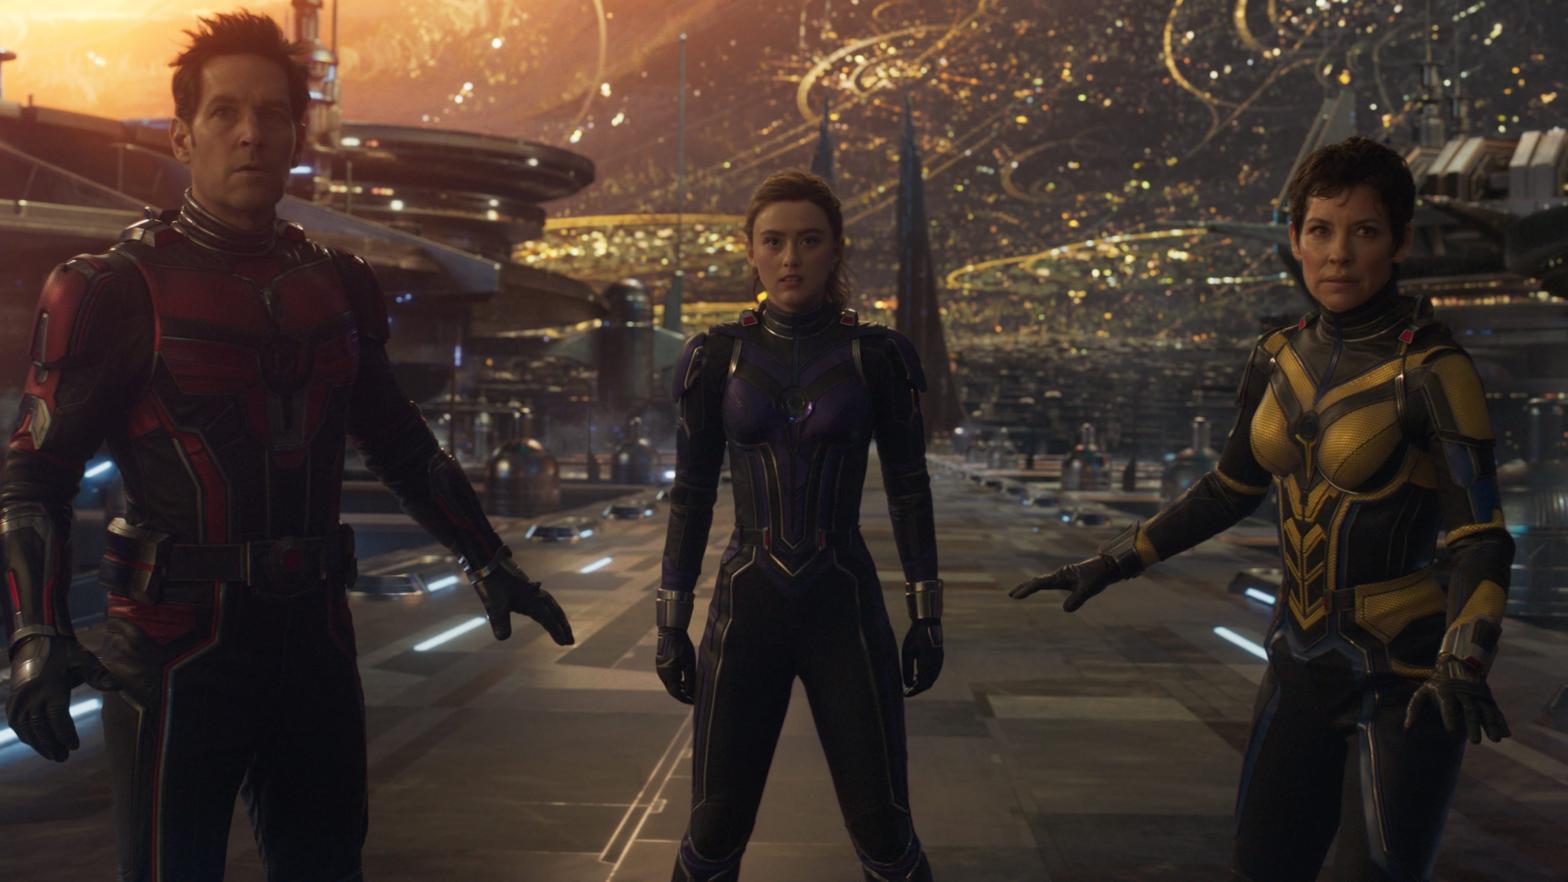 Ant-Man and the Wasp: Quantumania stars (L-R) Paul Rudd, Kathryn Newton, and Evangeline Lily, and opened on February 17 to mixed reviews. (Image: Disney)